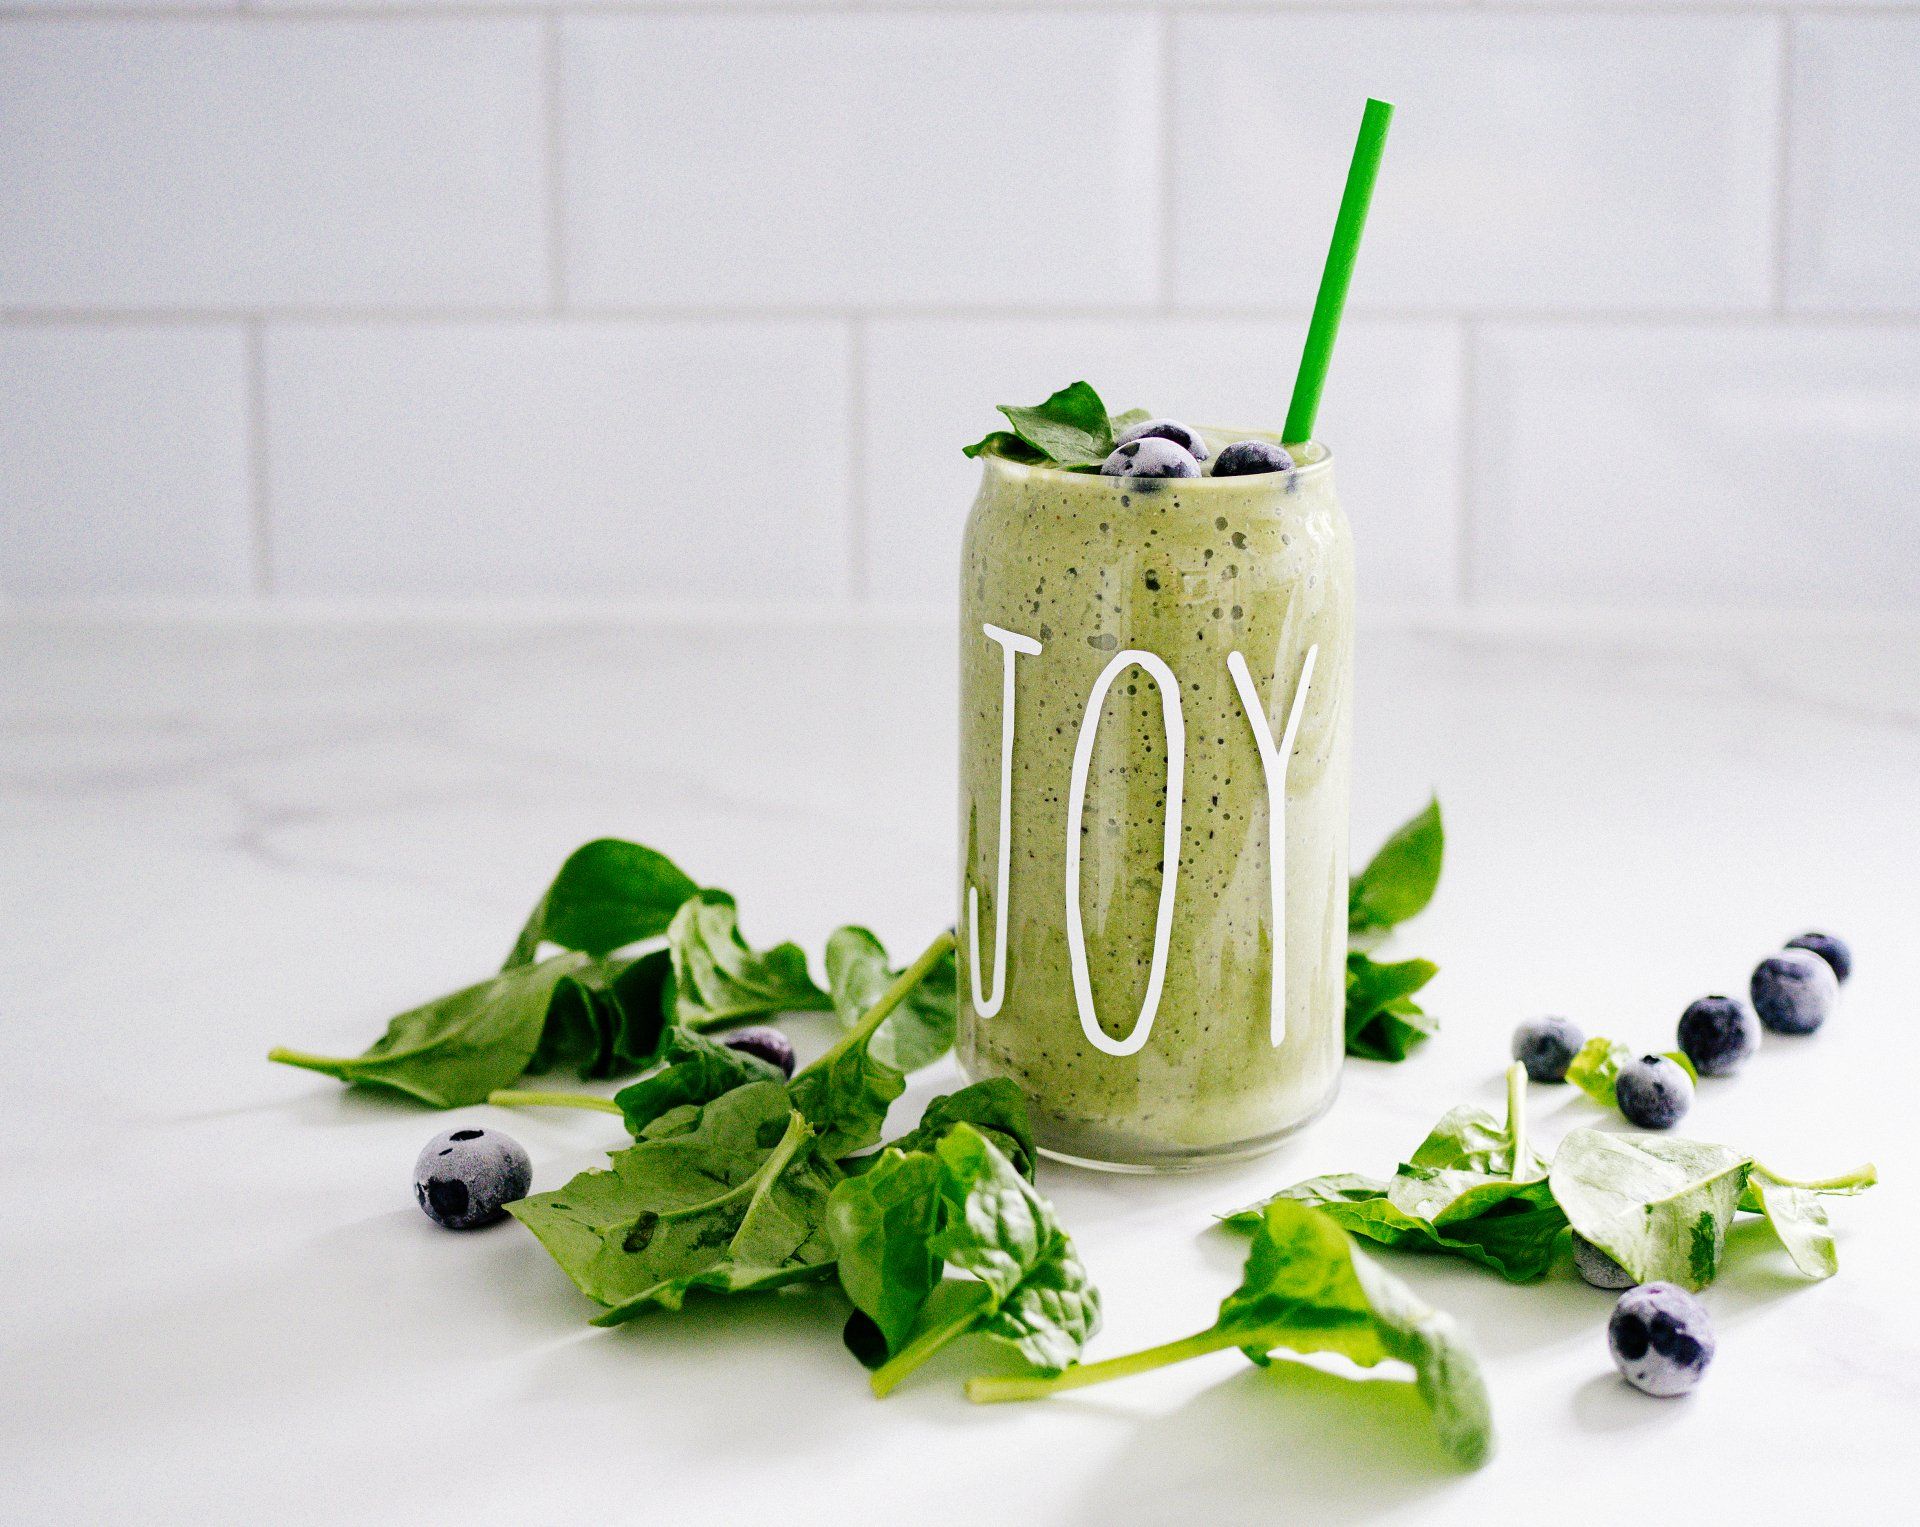 Start a healing journey with a green smoothie with spinach and blueberries.